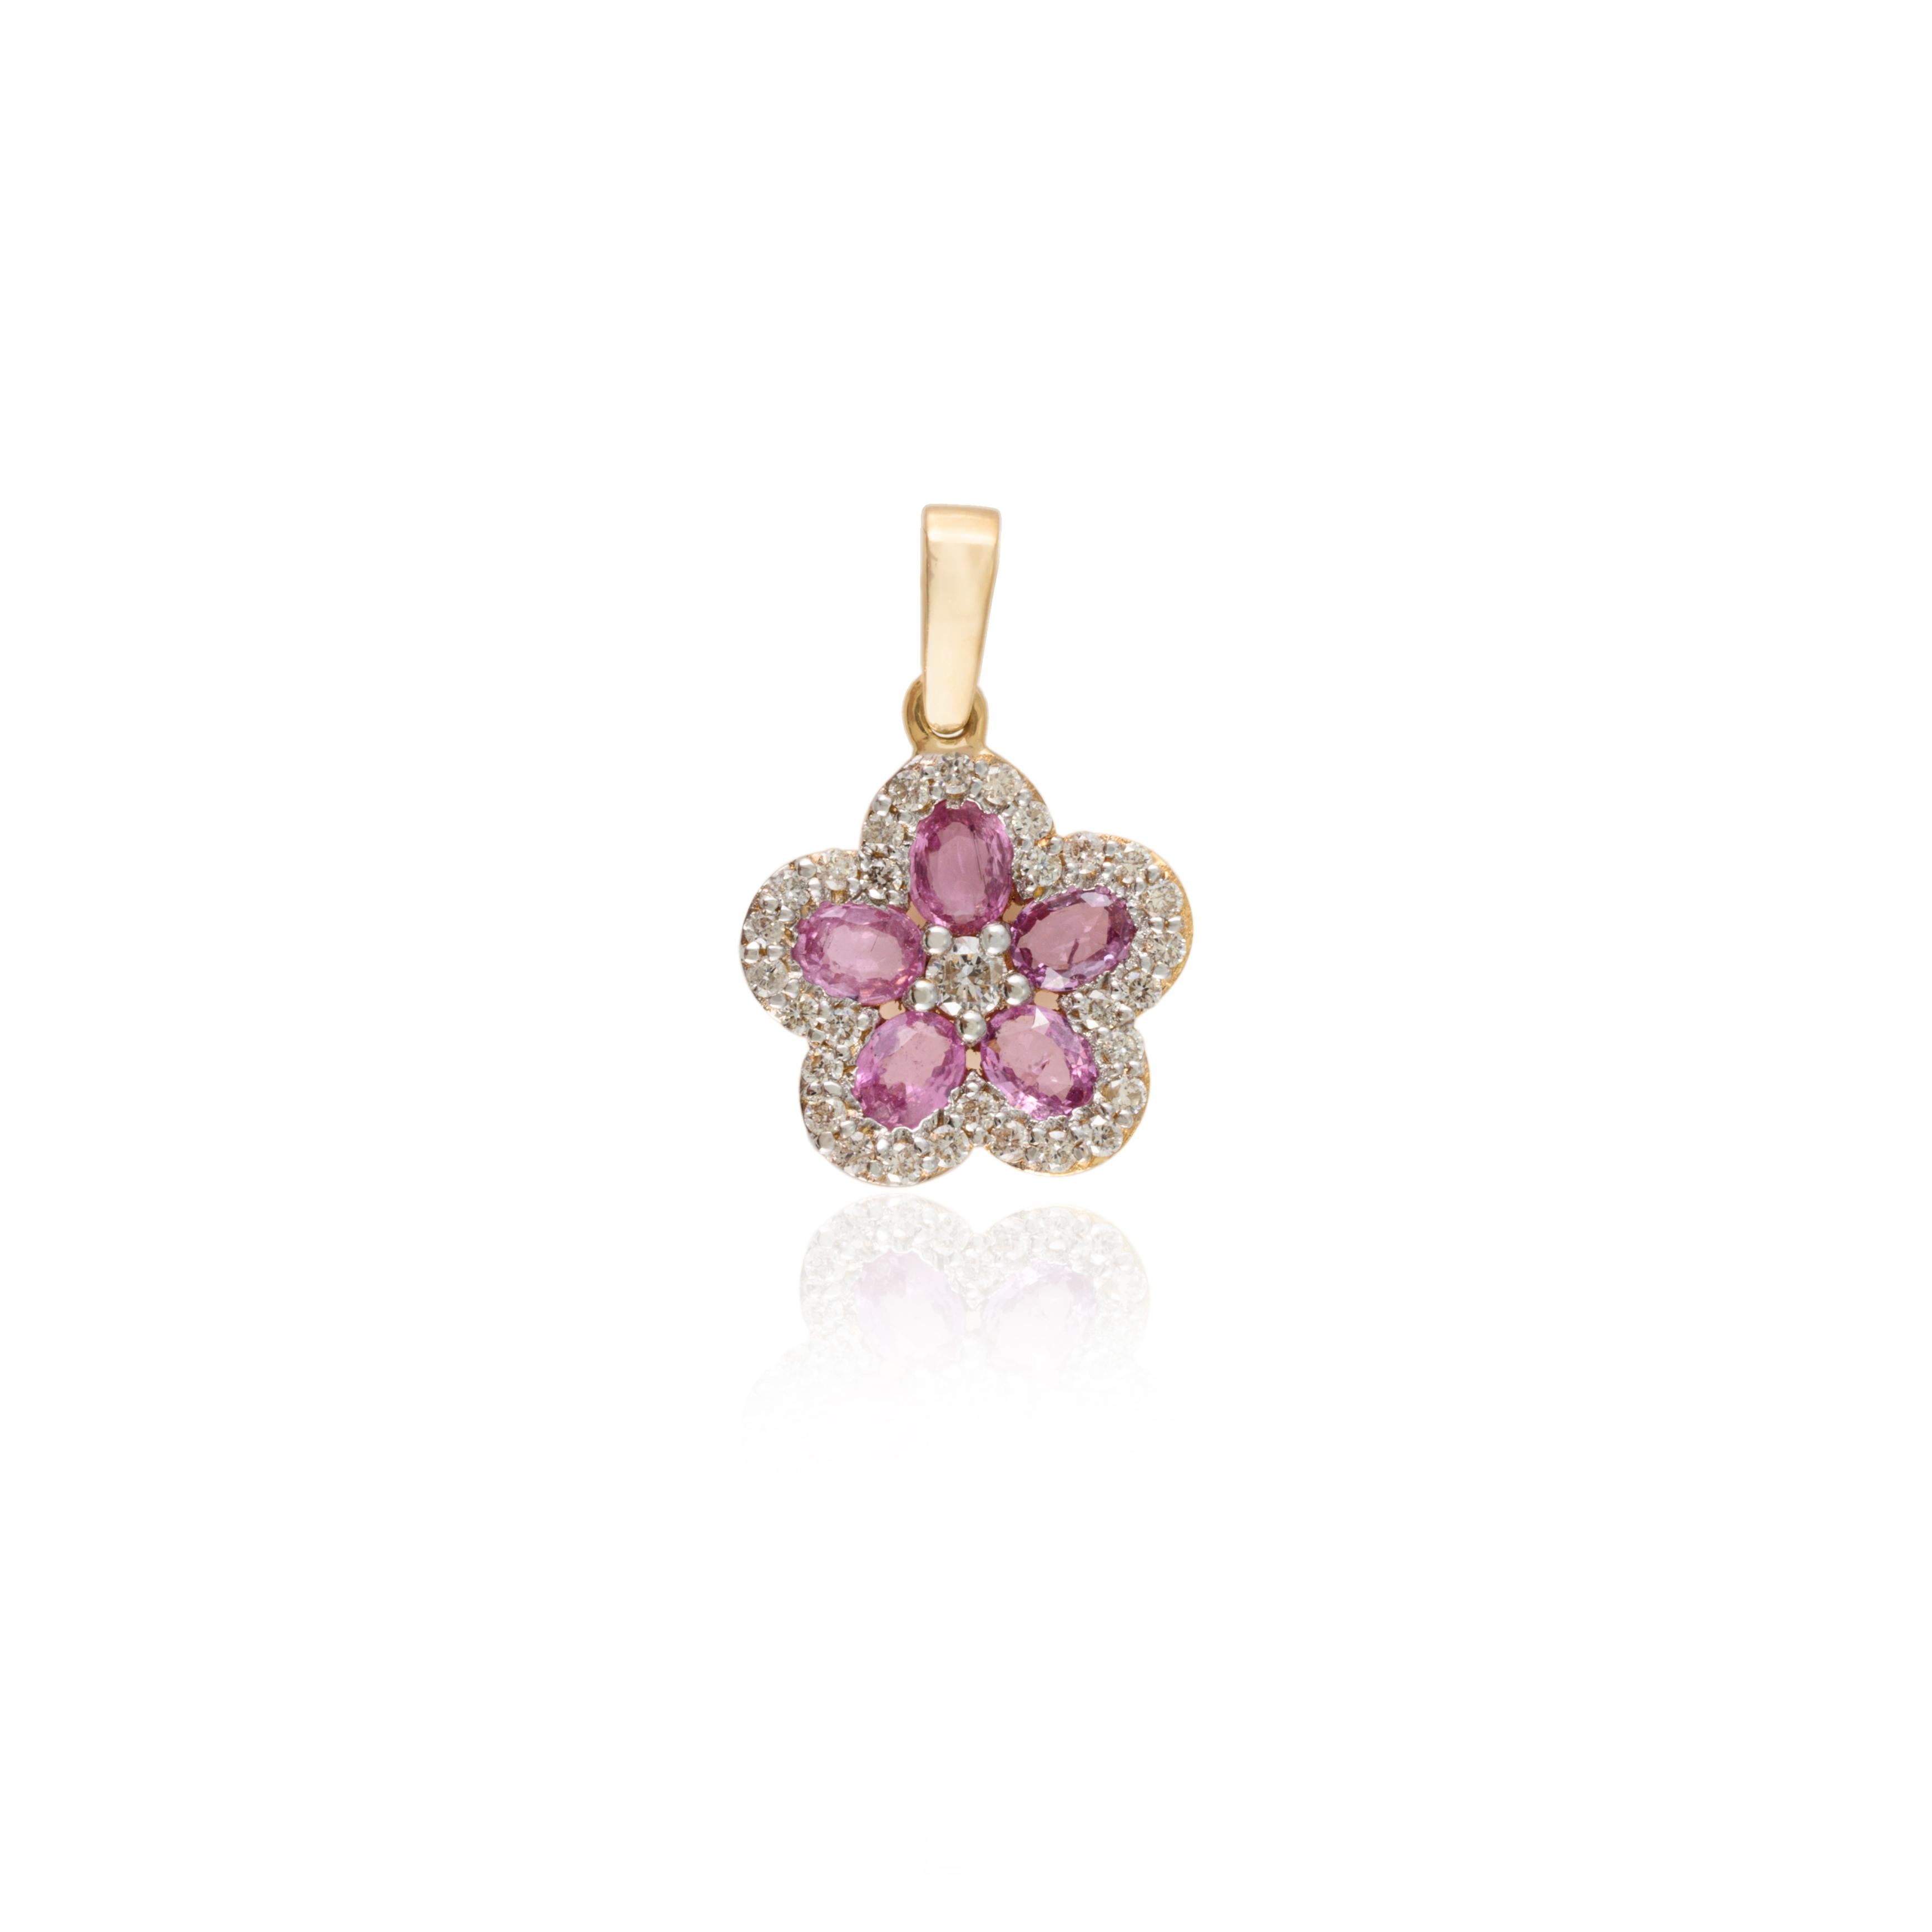 Cherry Blossom Pink Sapphire Diamond Flower Pendant in 18k Yellow Gold In New Condition For Sale In Houston, TX